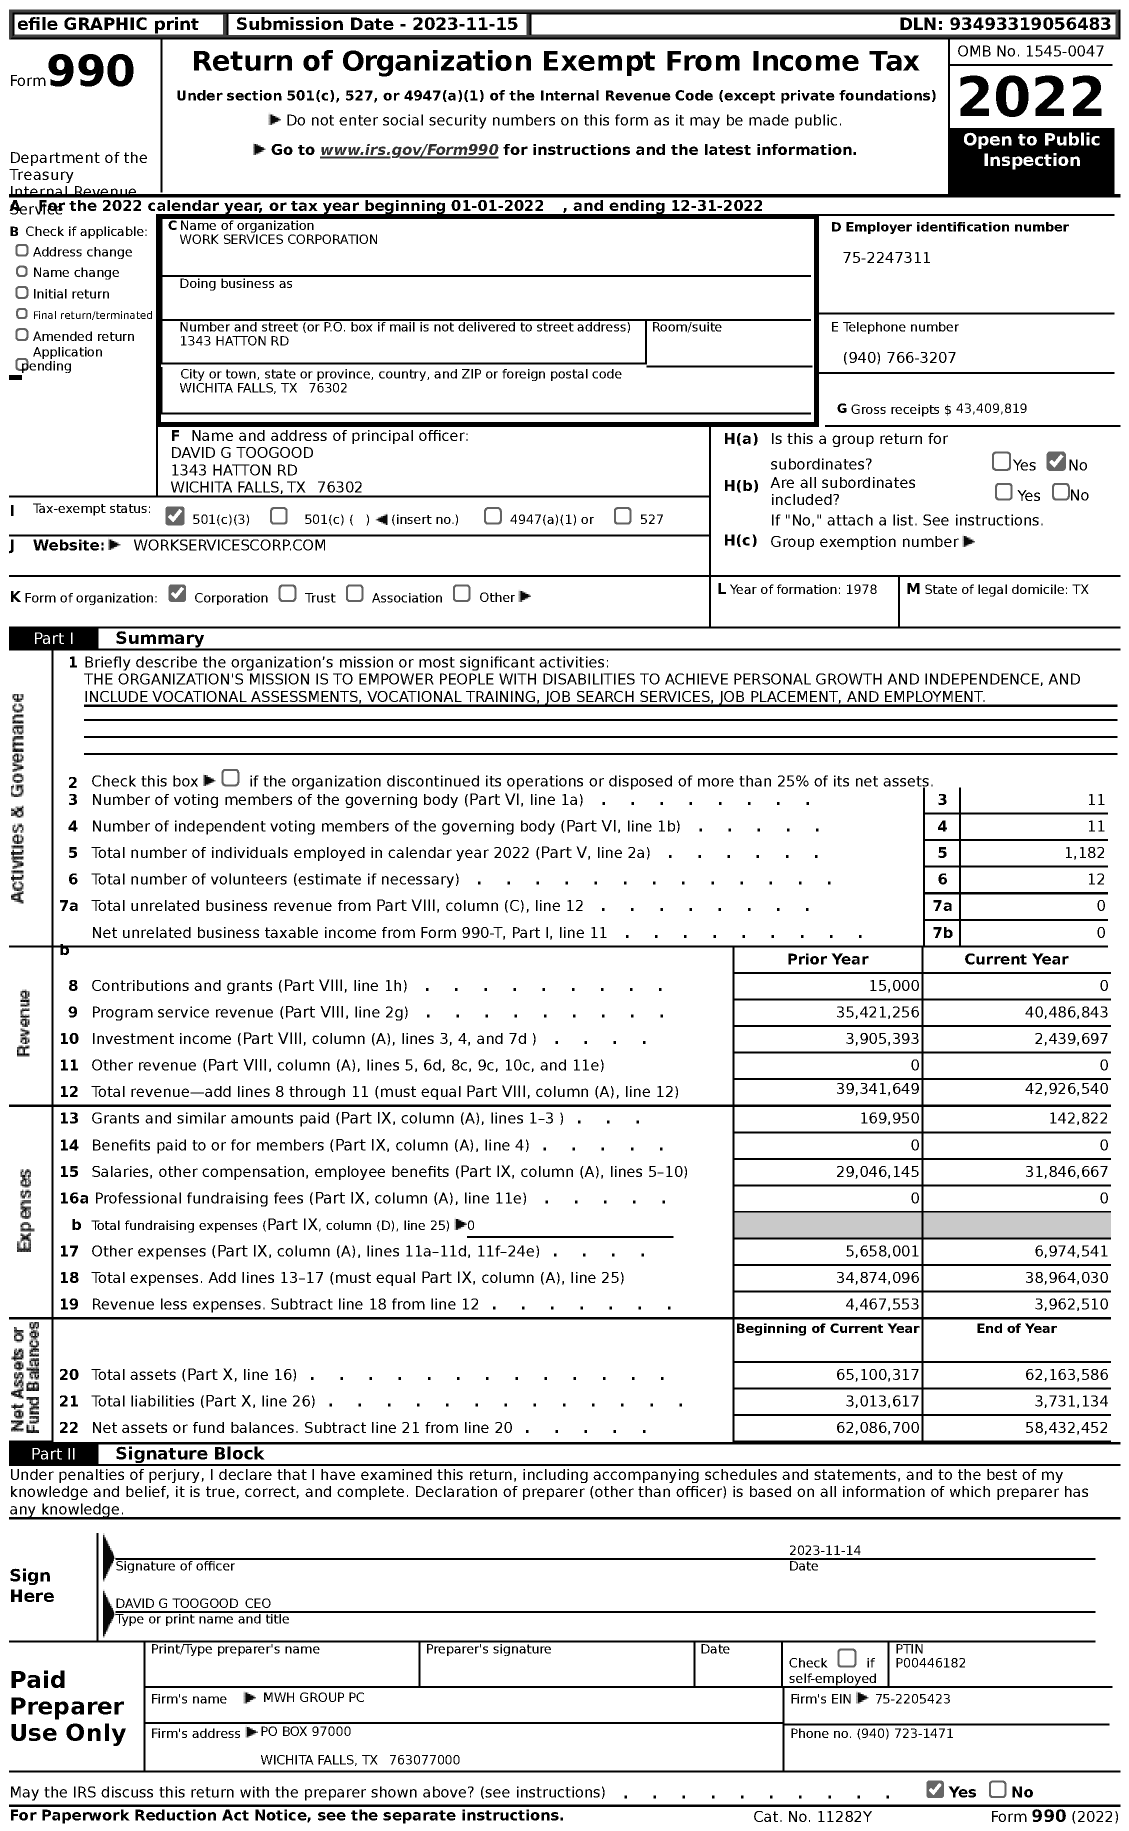 Image of first page of 2022 Form 990 for Work Services Corporation (WSC)